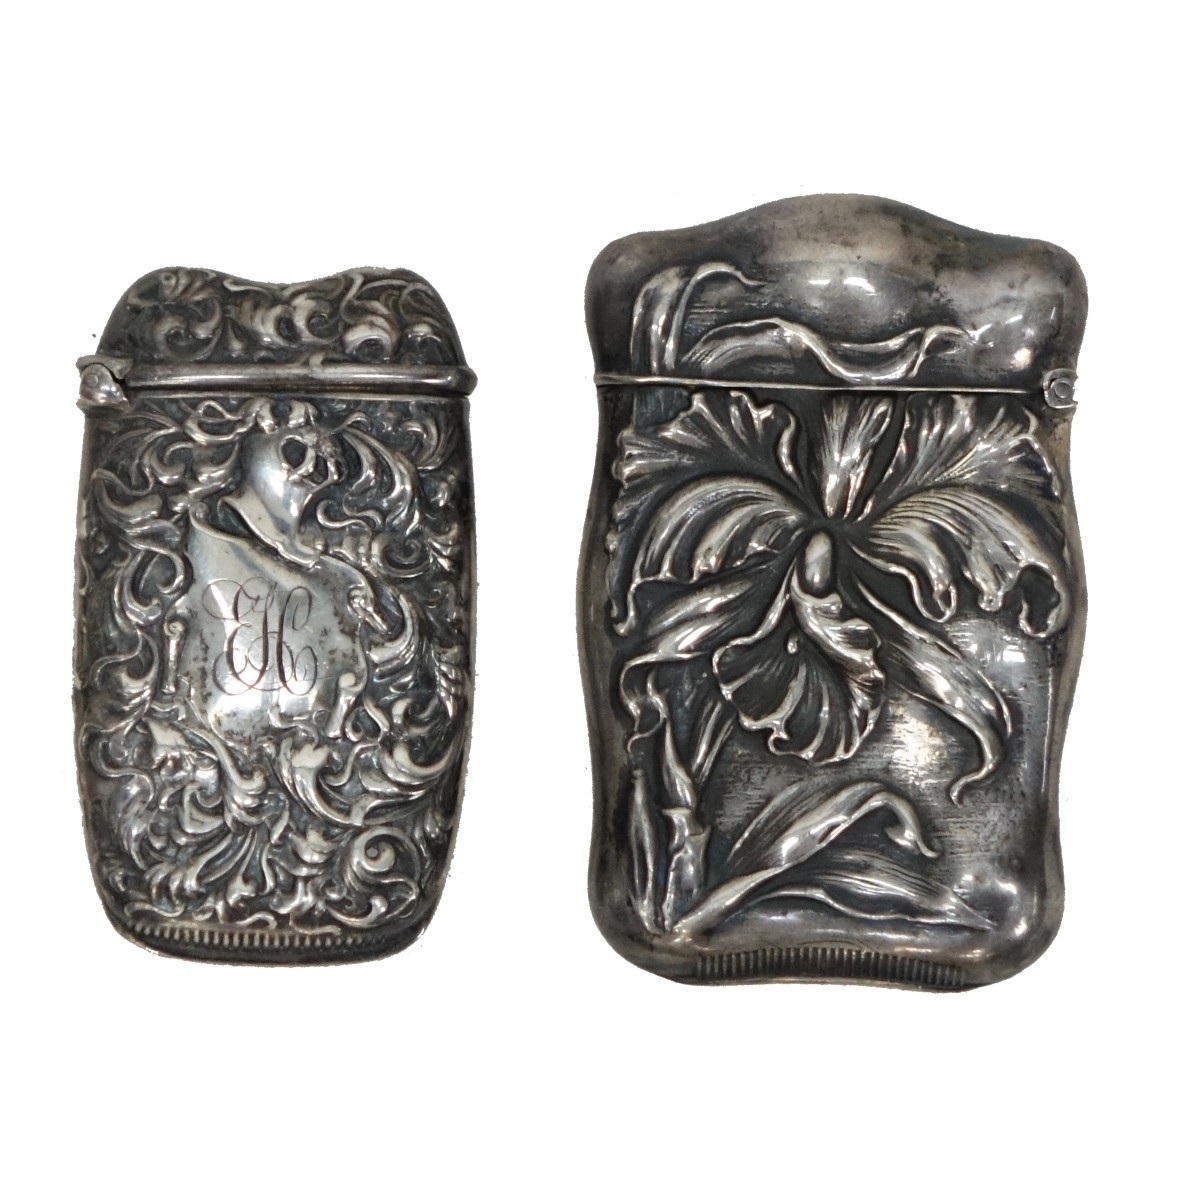 (2) Sterling Silver Match Boxes